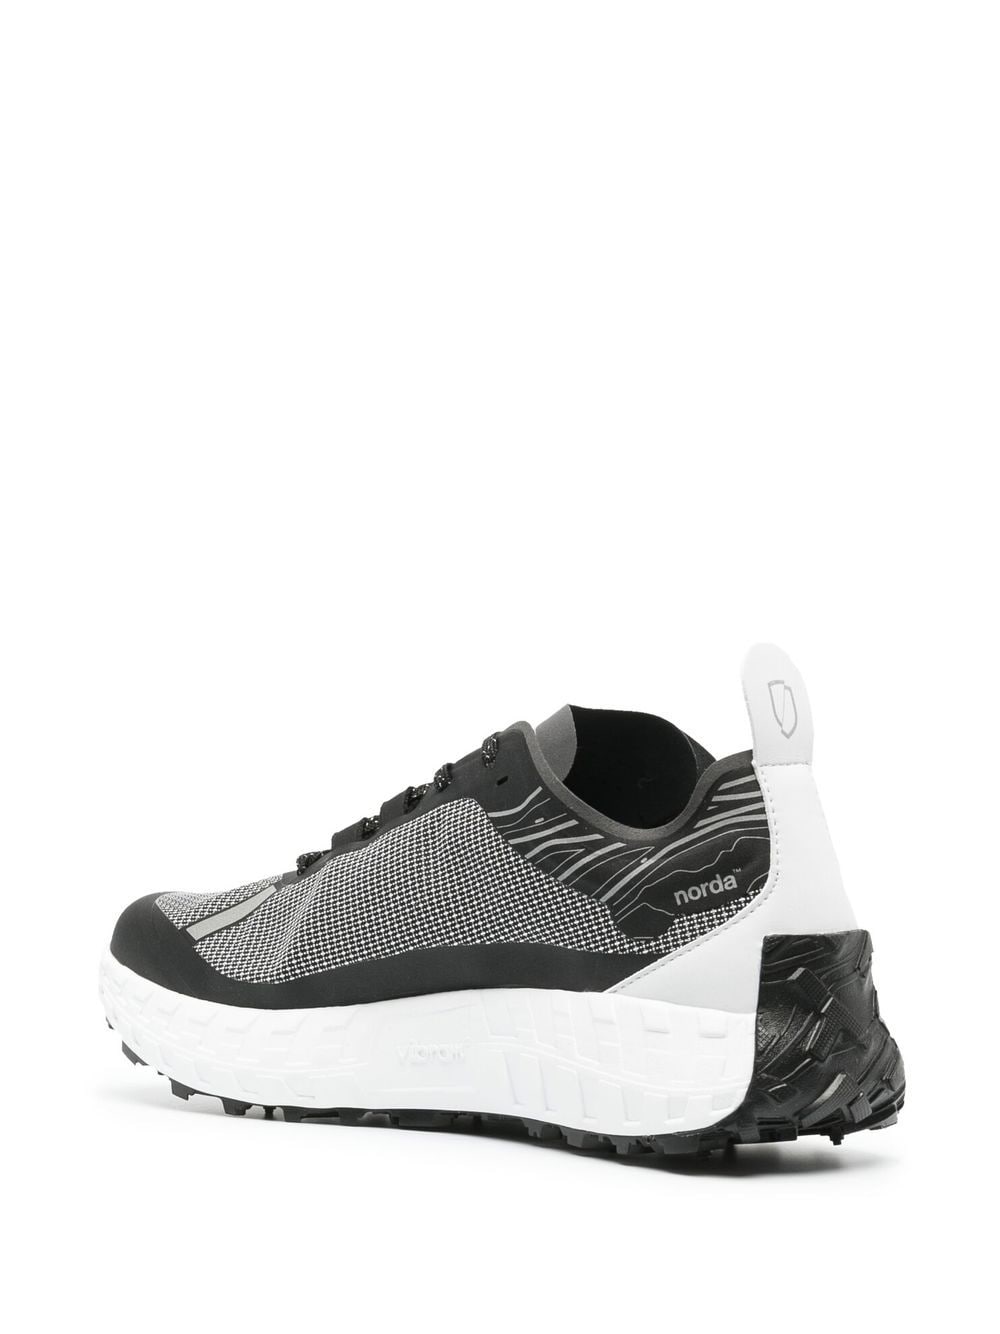  Norda 001 Lace-up Running Sneakers - Black 